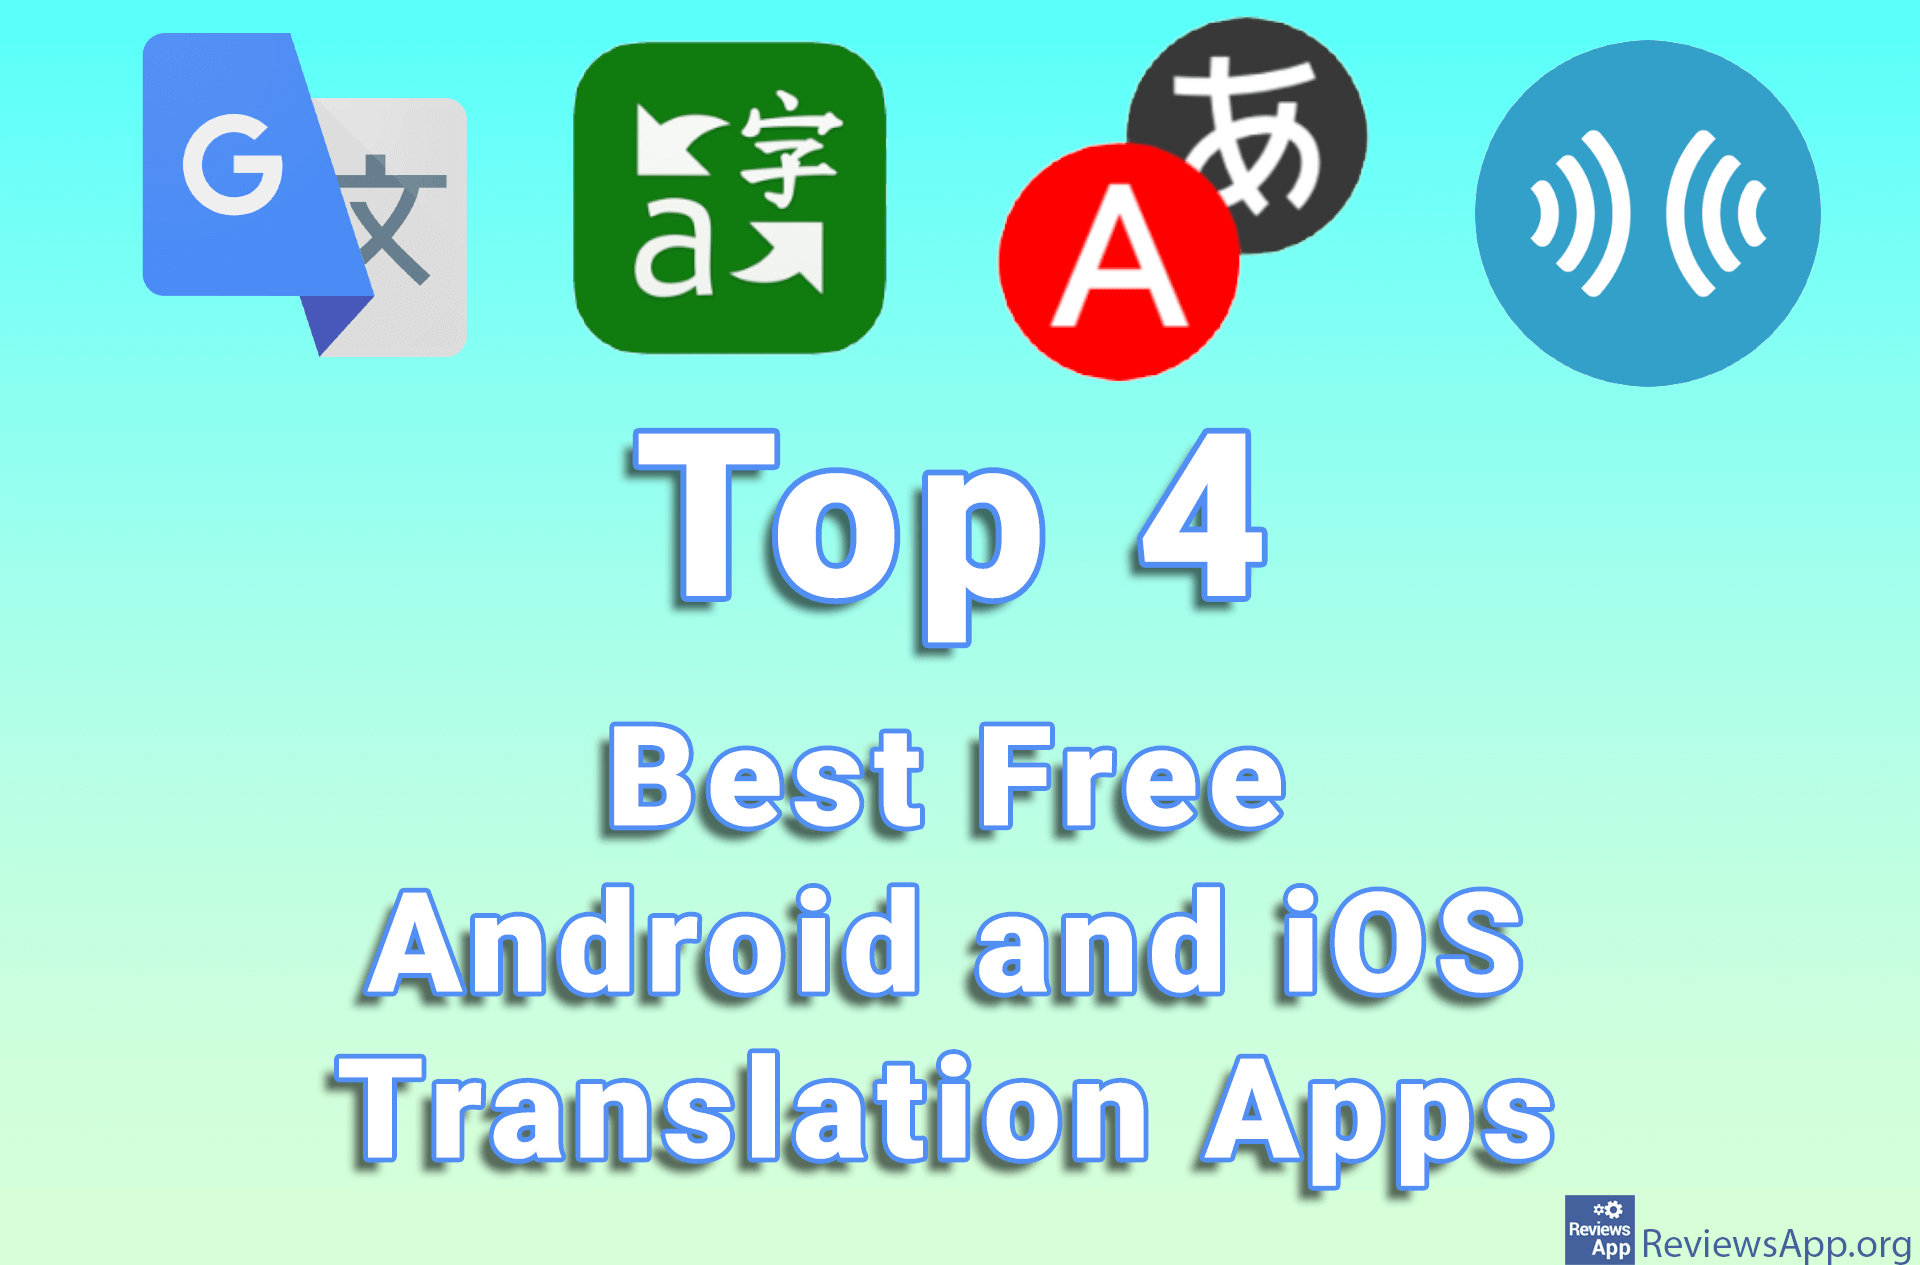 Top 4 Best Free Android and iOS Translation Apps